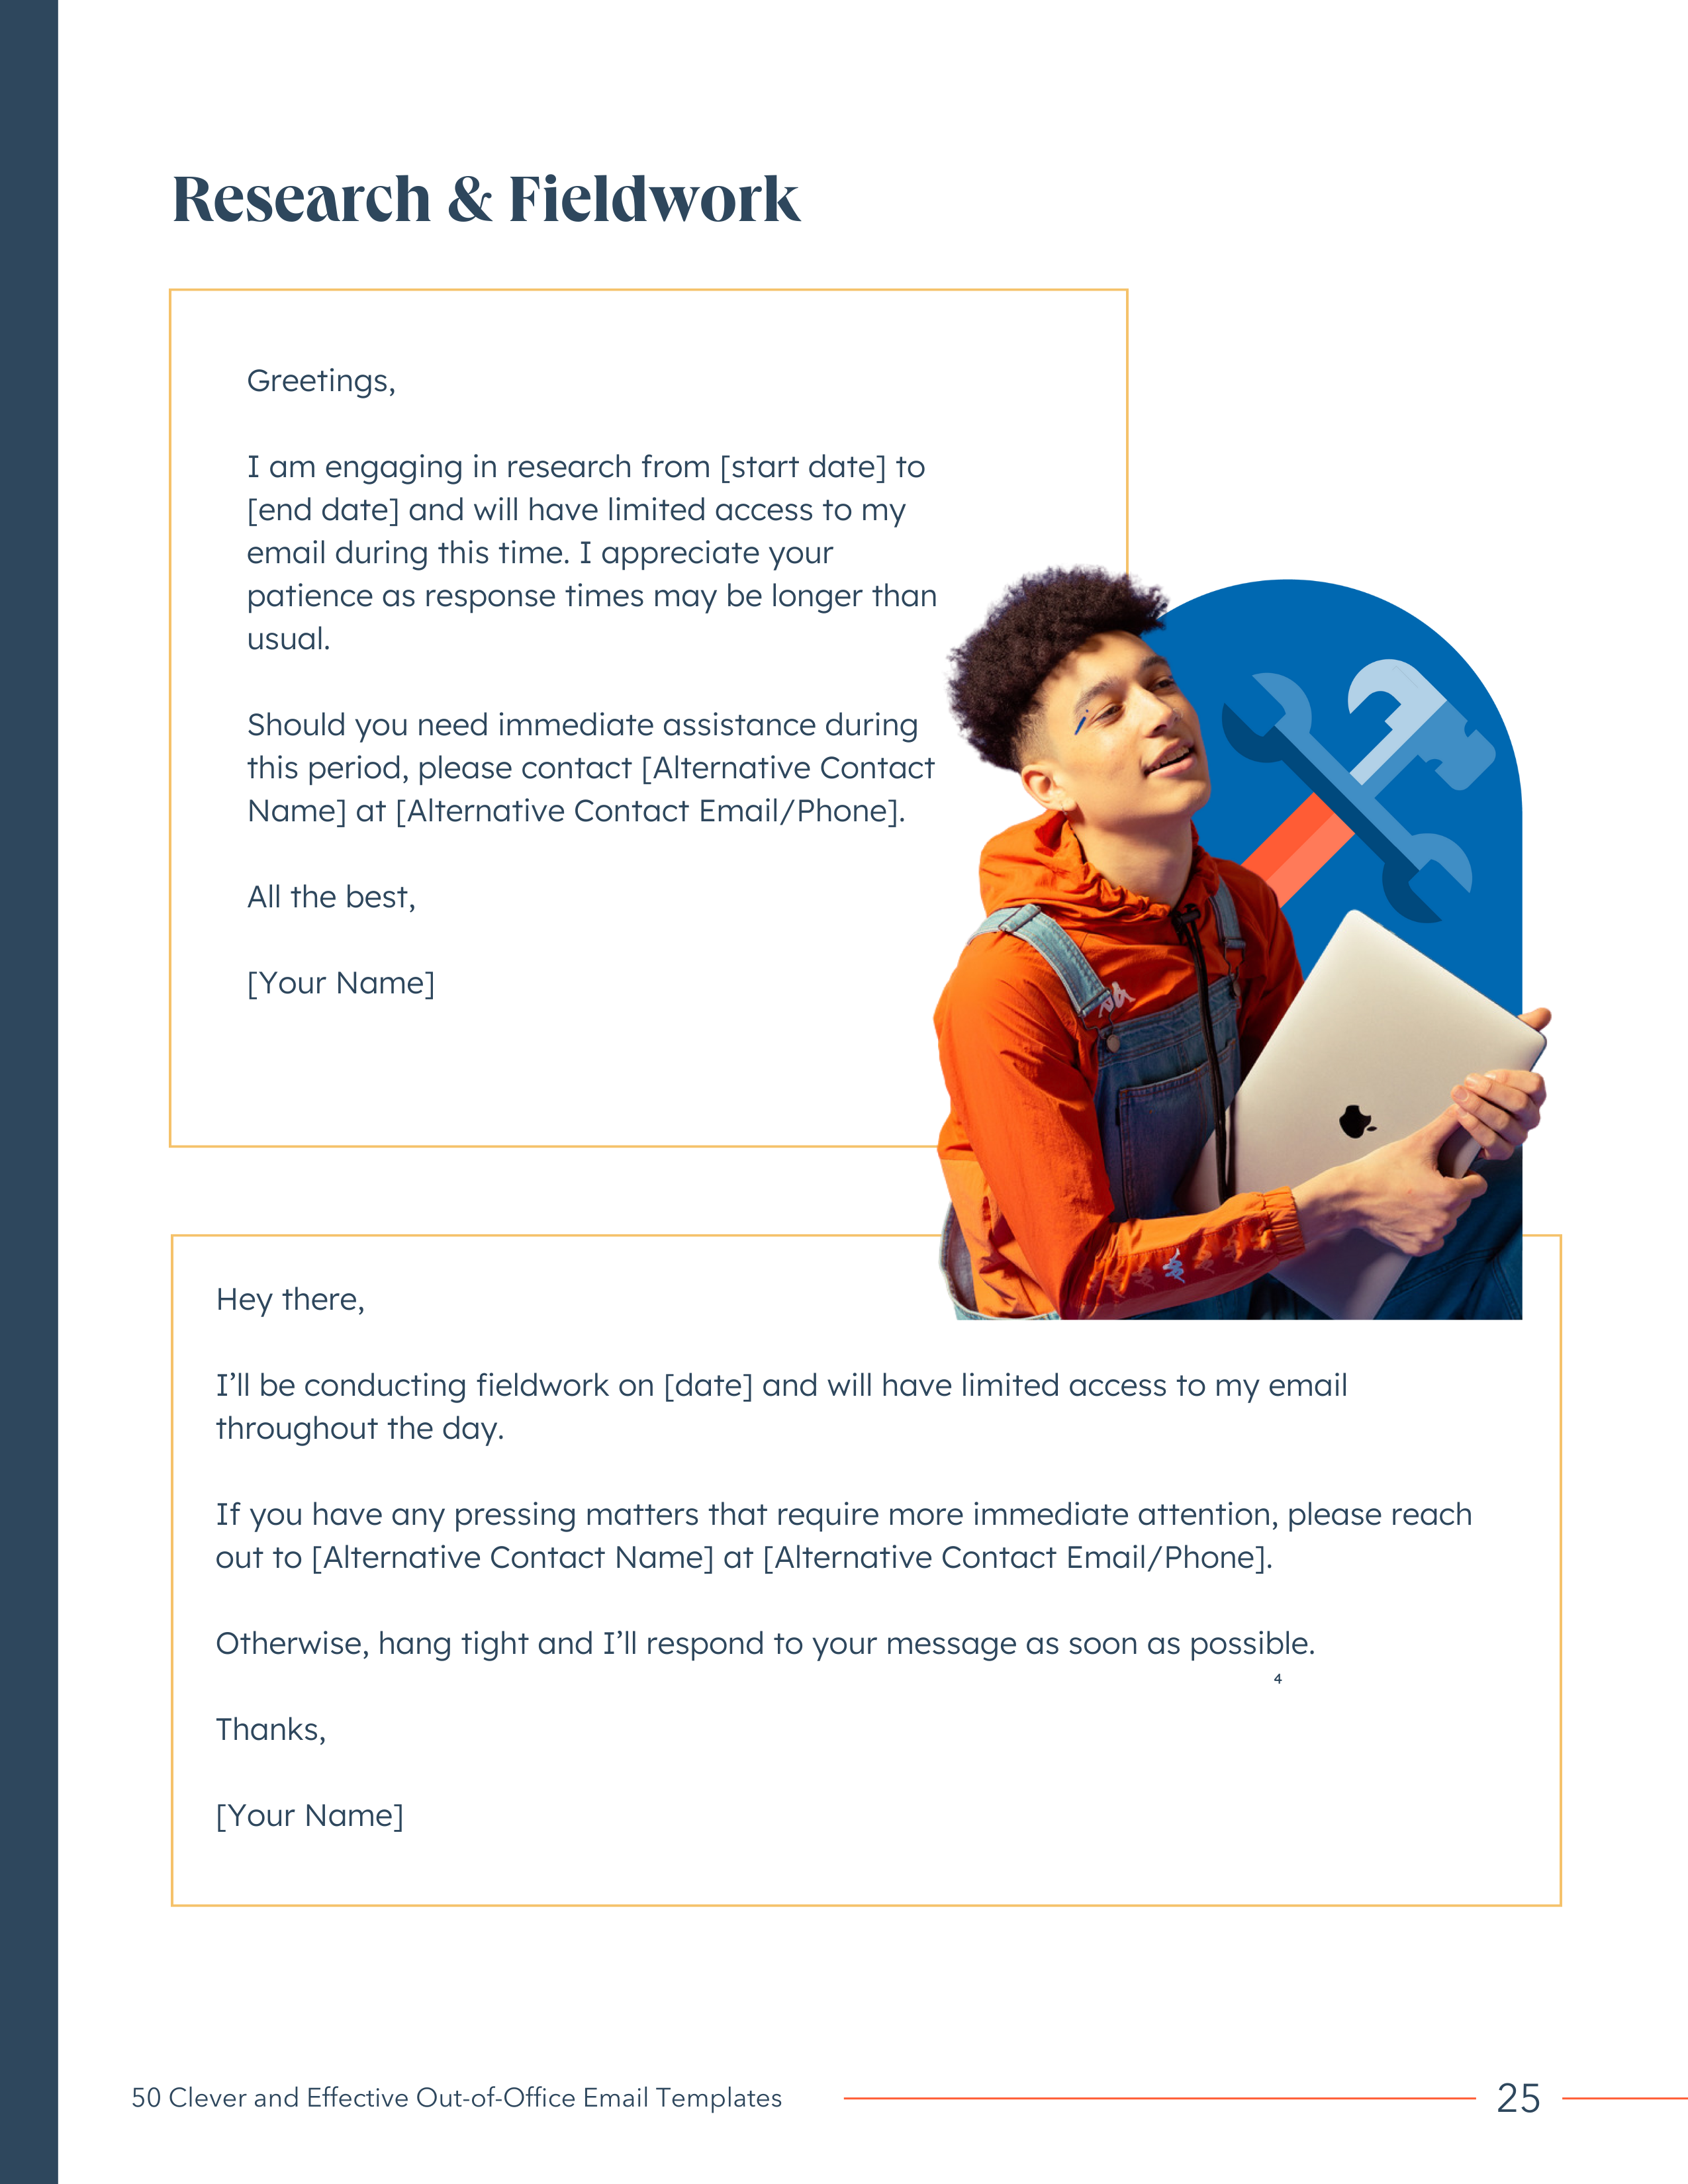 ebook - OOO Email Templates copy 2